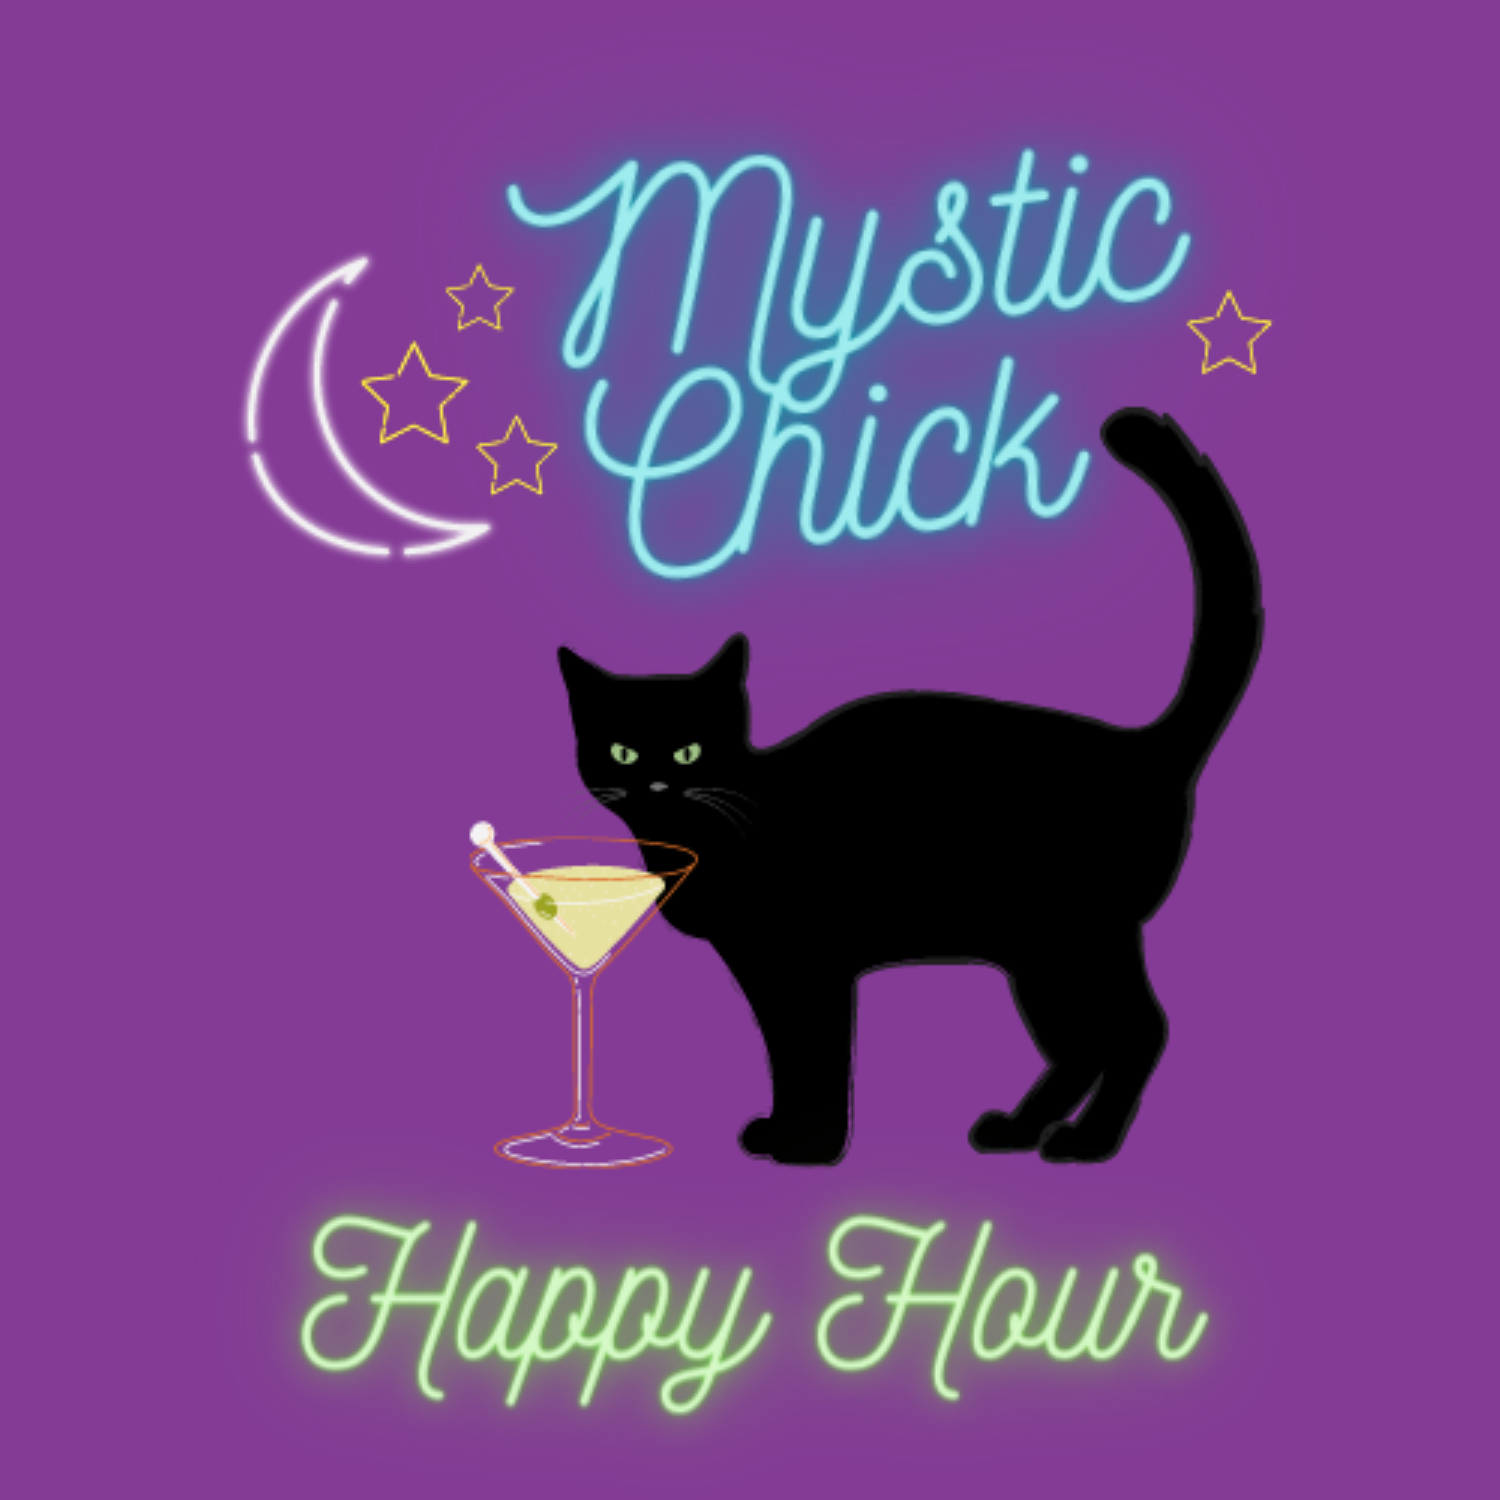 Happy Hour with Mystic Chick